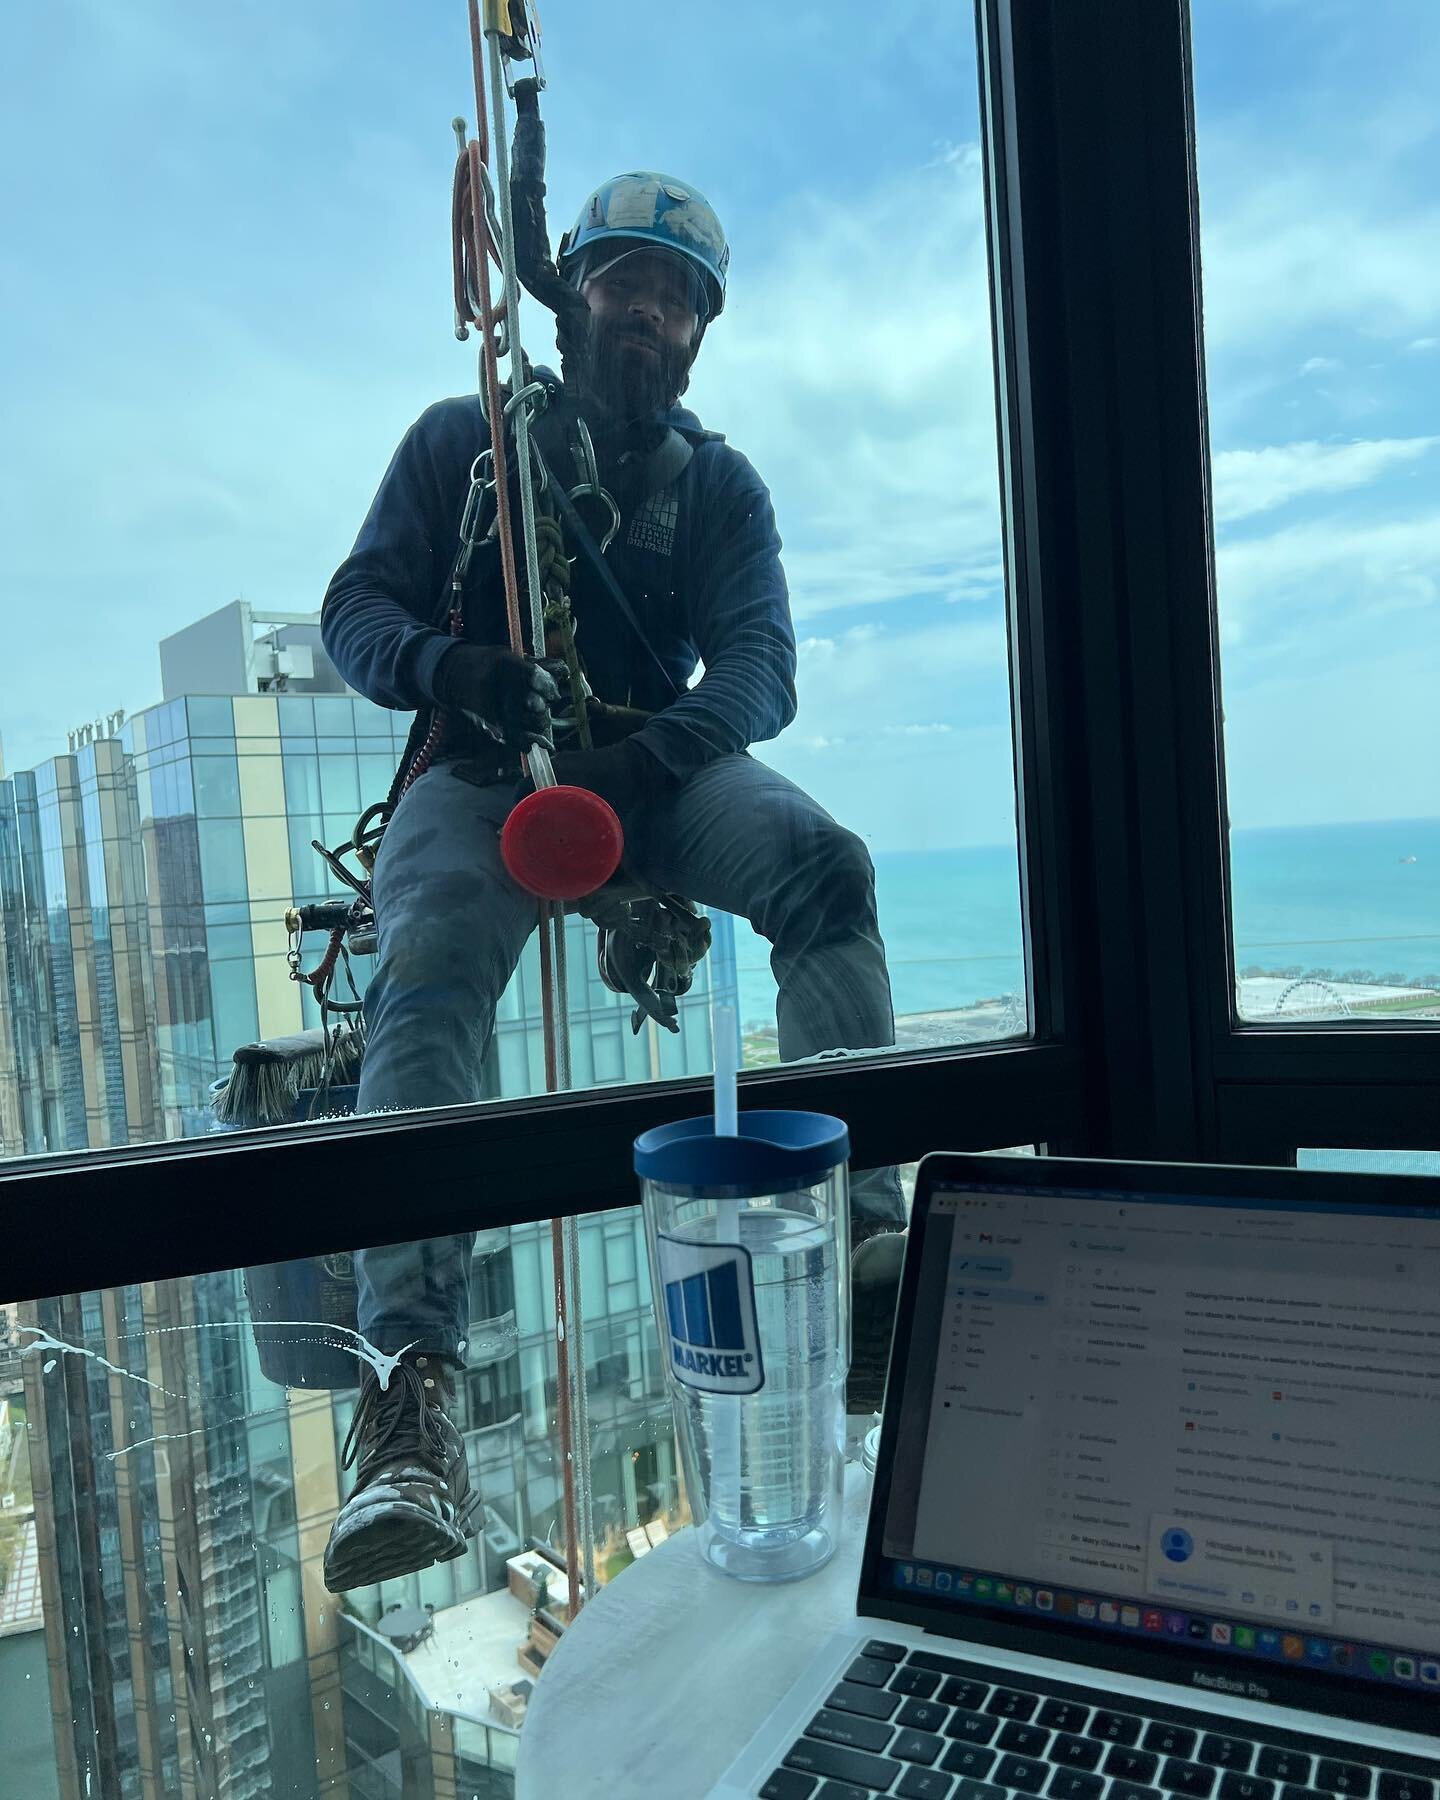 My visitor while working this AM!! High rise living🏙️ 
Appreciate what you do🧽🫧
*
*
*
*
#flexwellnesschicago #windowwashing #highriseliving #cityonthelake #working